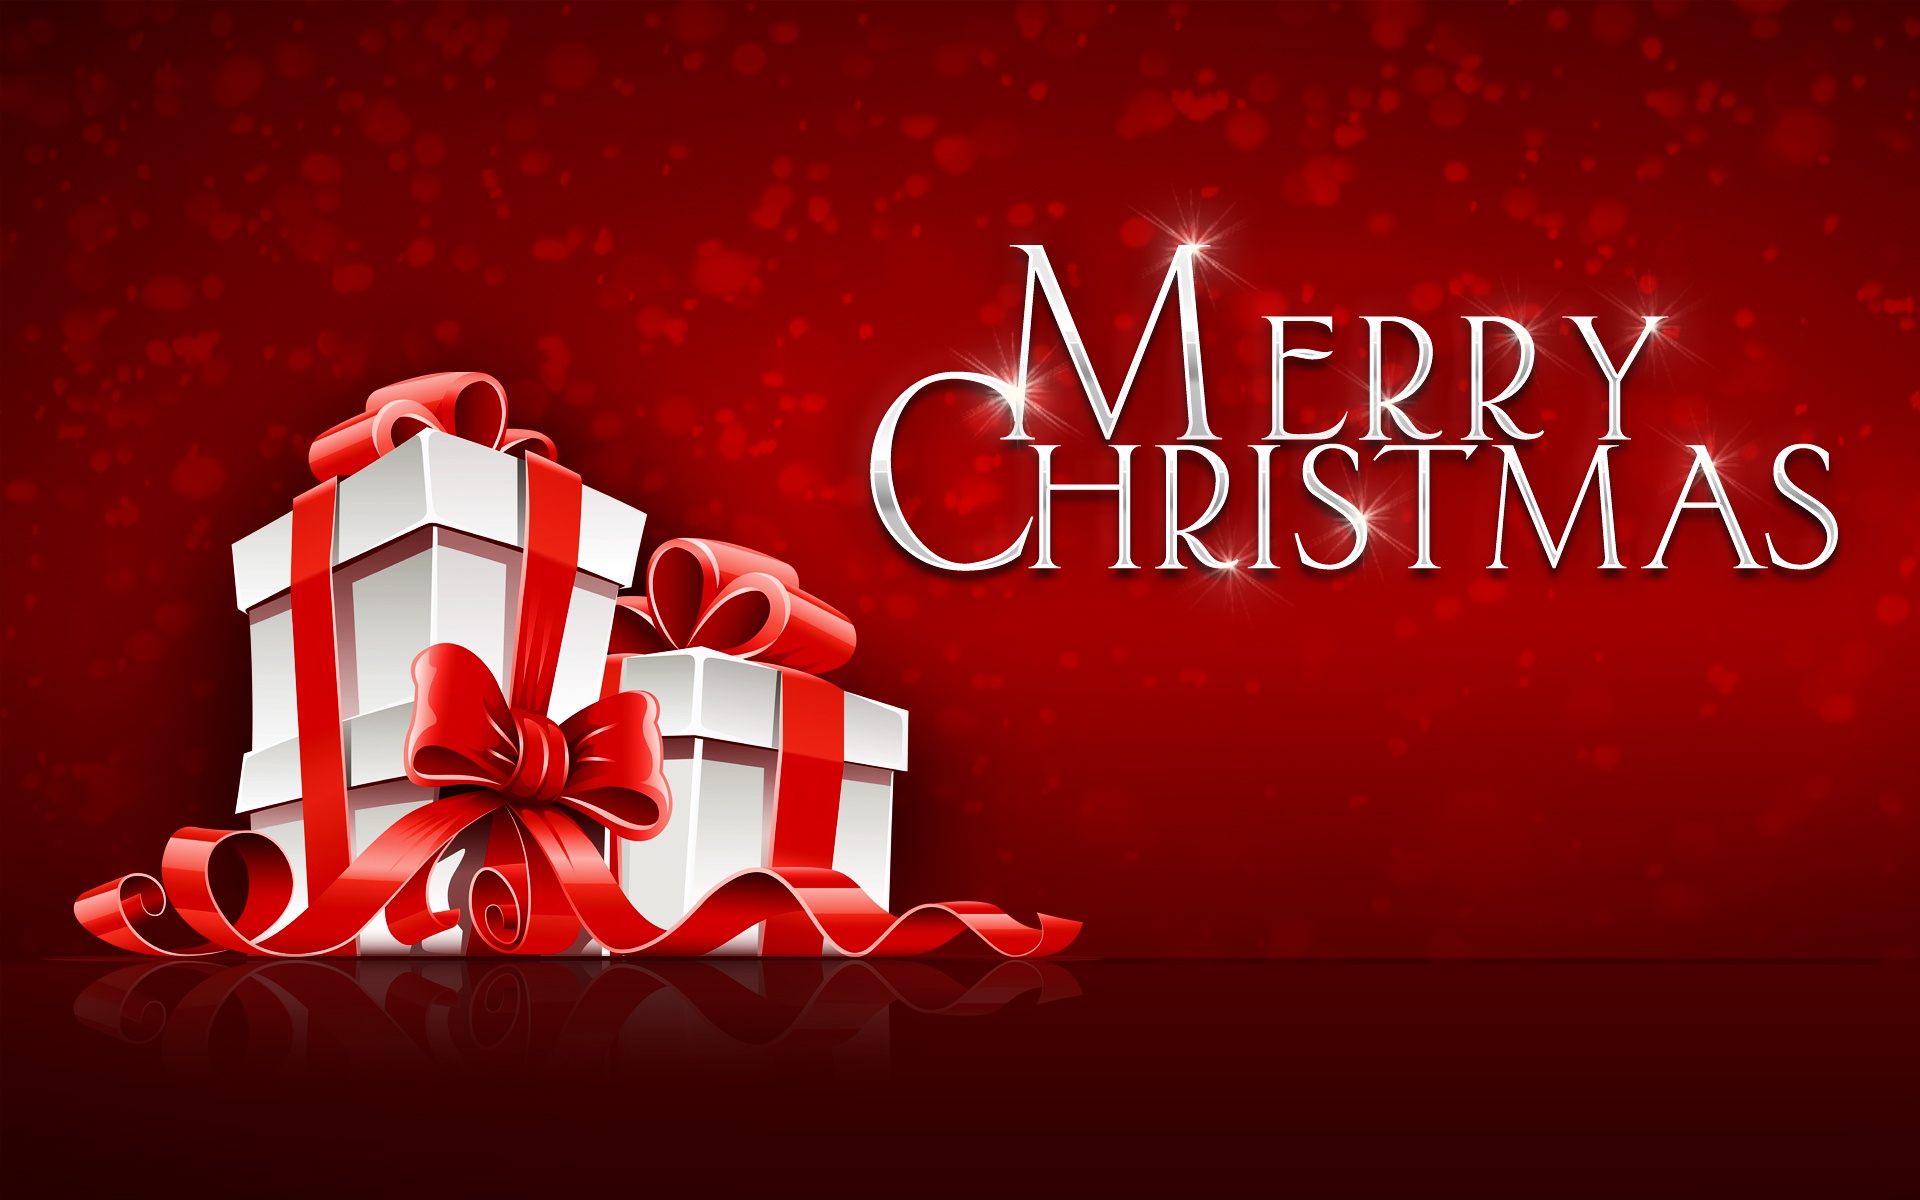 New Merry Christmas Hd Wallpapers